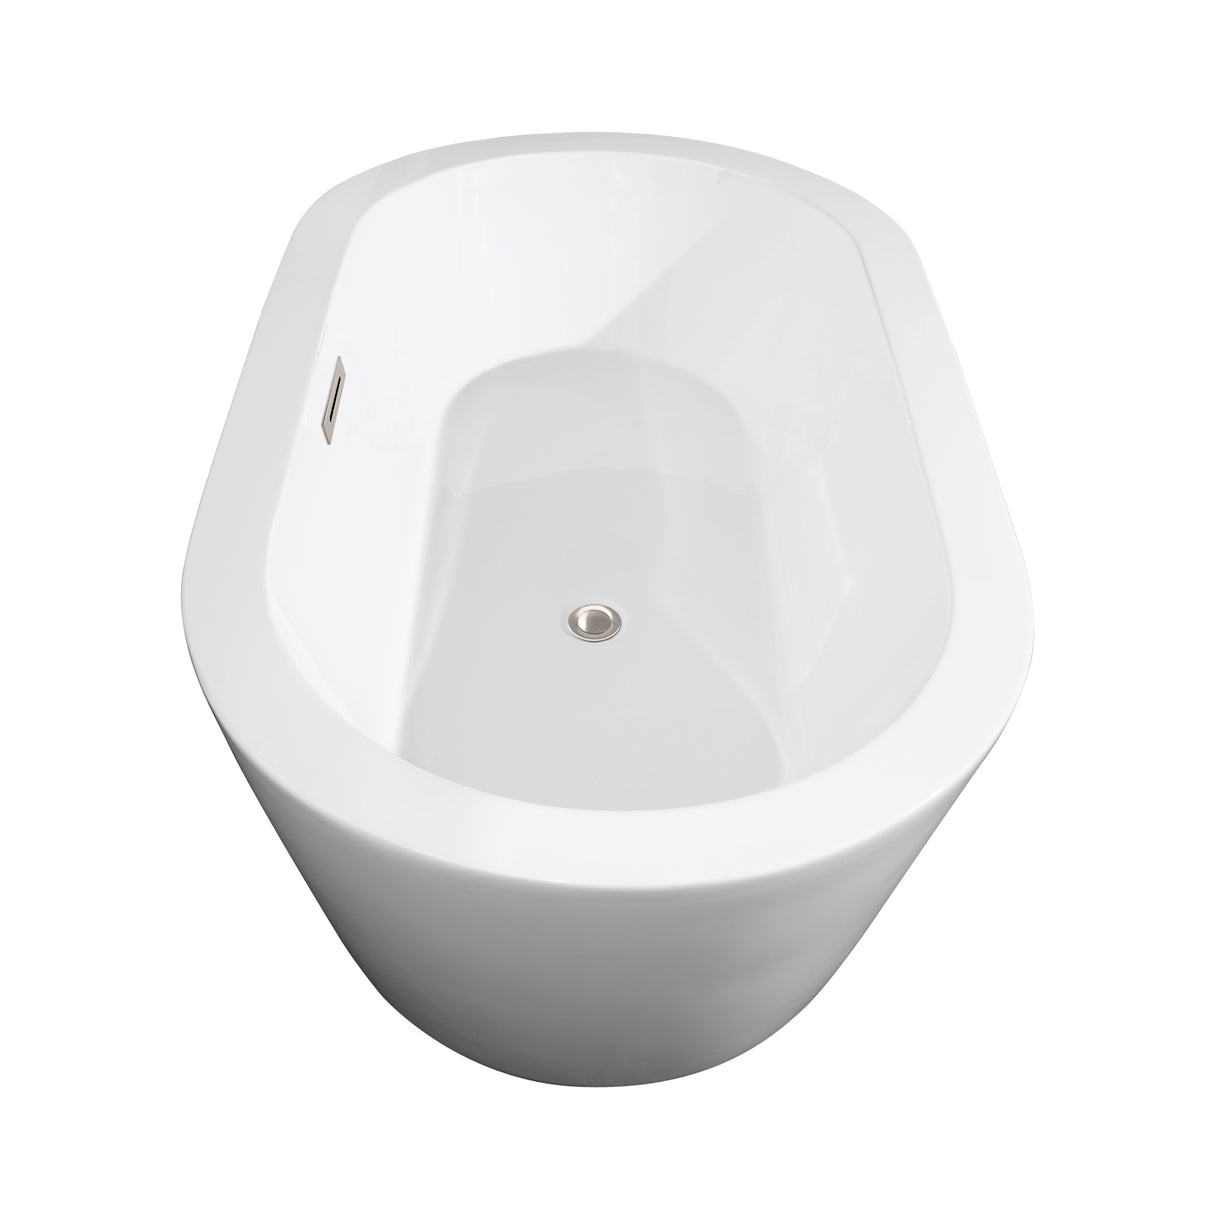 Mermaid 60 Inch Freestanding Bathtub in White with Floor Mounted Faucet Drain and Overflow Trim in Brushed Nickel